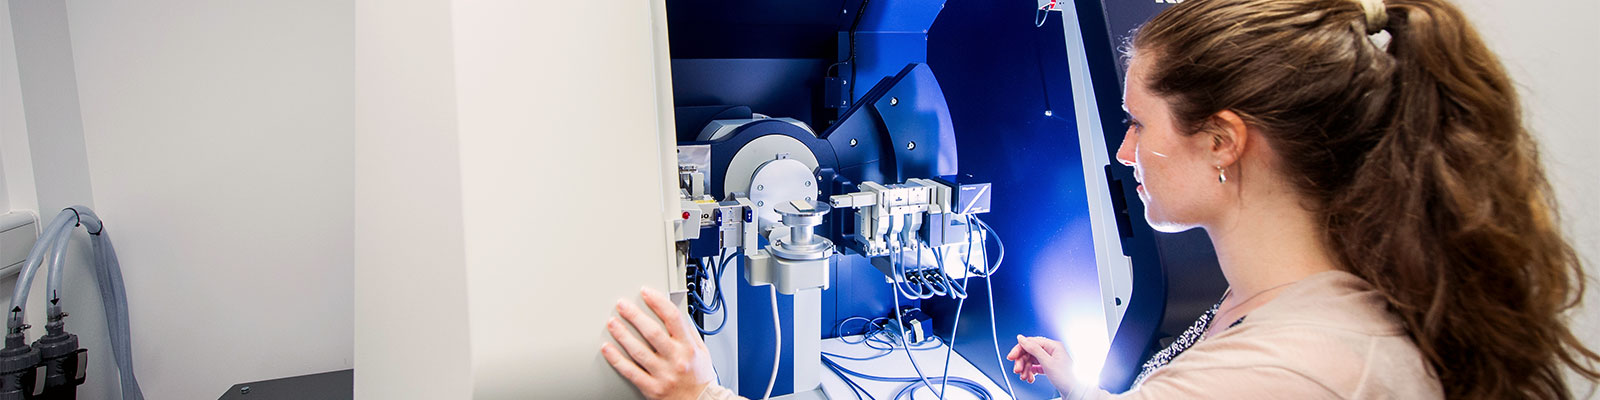 An academic using an x-ray diffractor